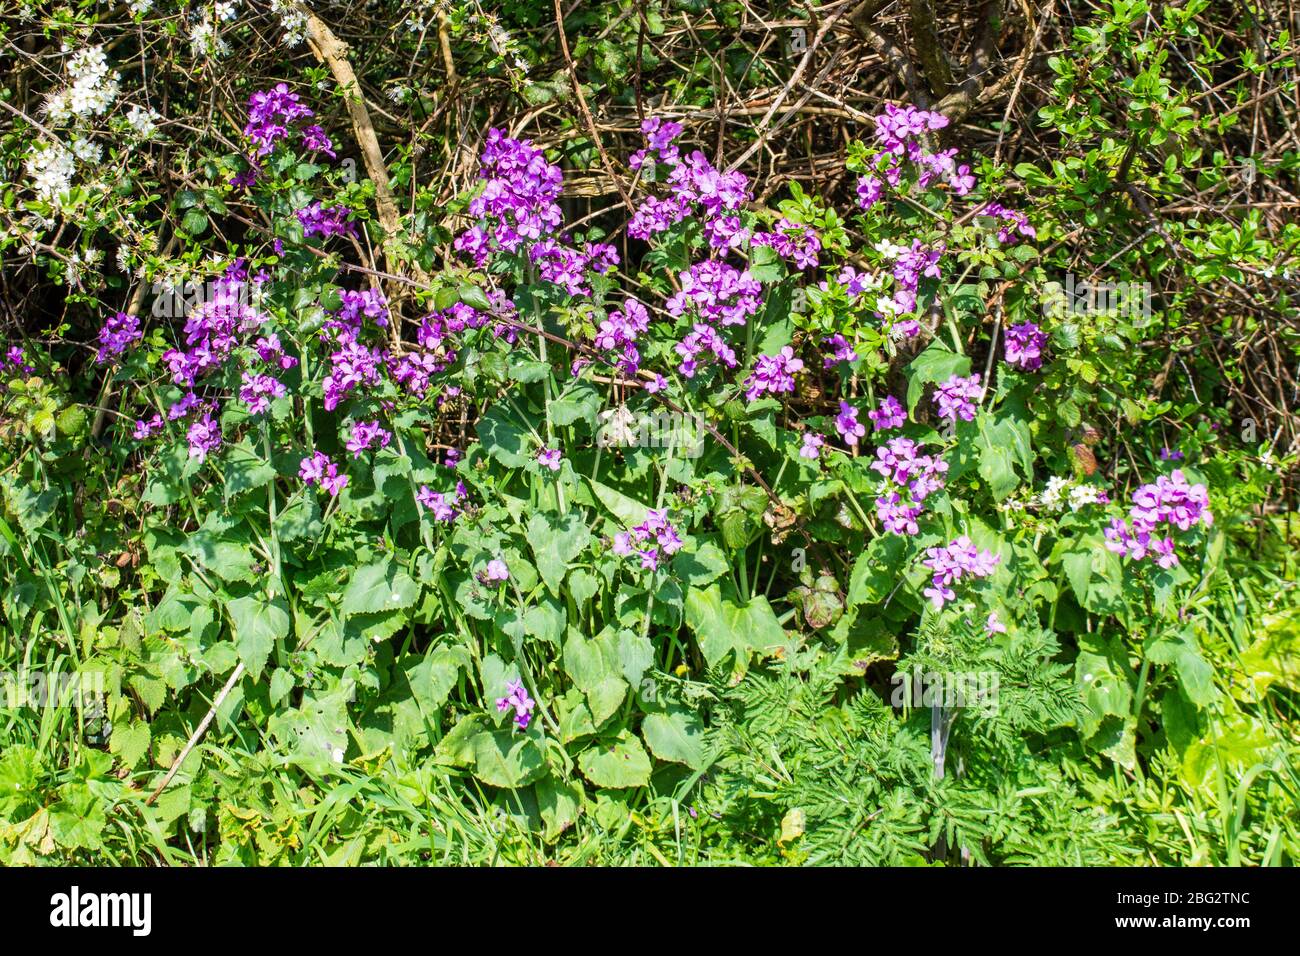 A patch of pink purple annual honesty Lunaria annua flowers growing against a hedgerow base in spring Stock Photo